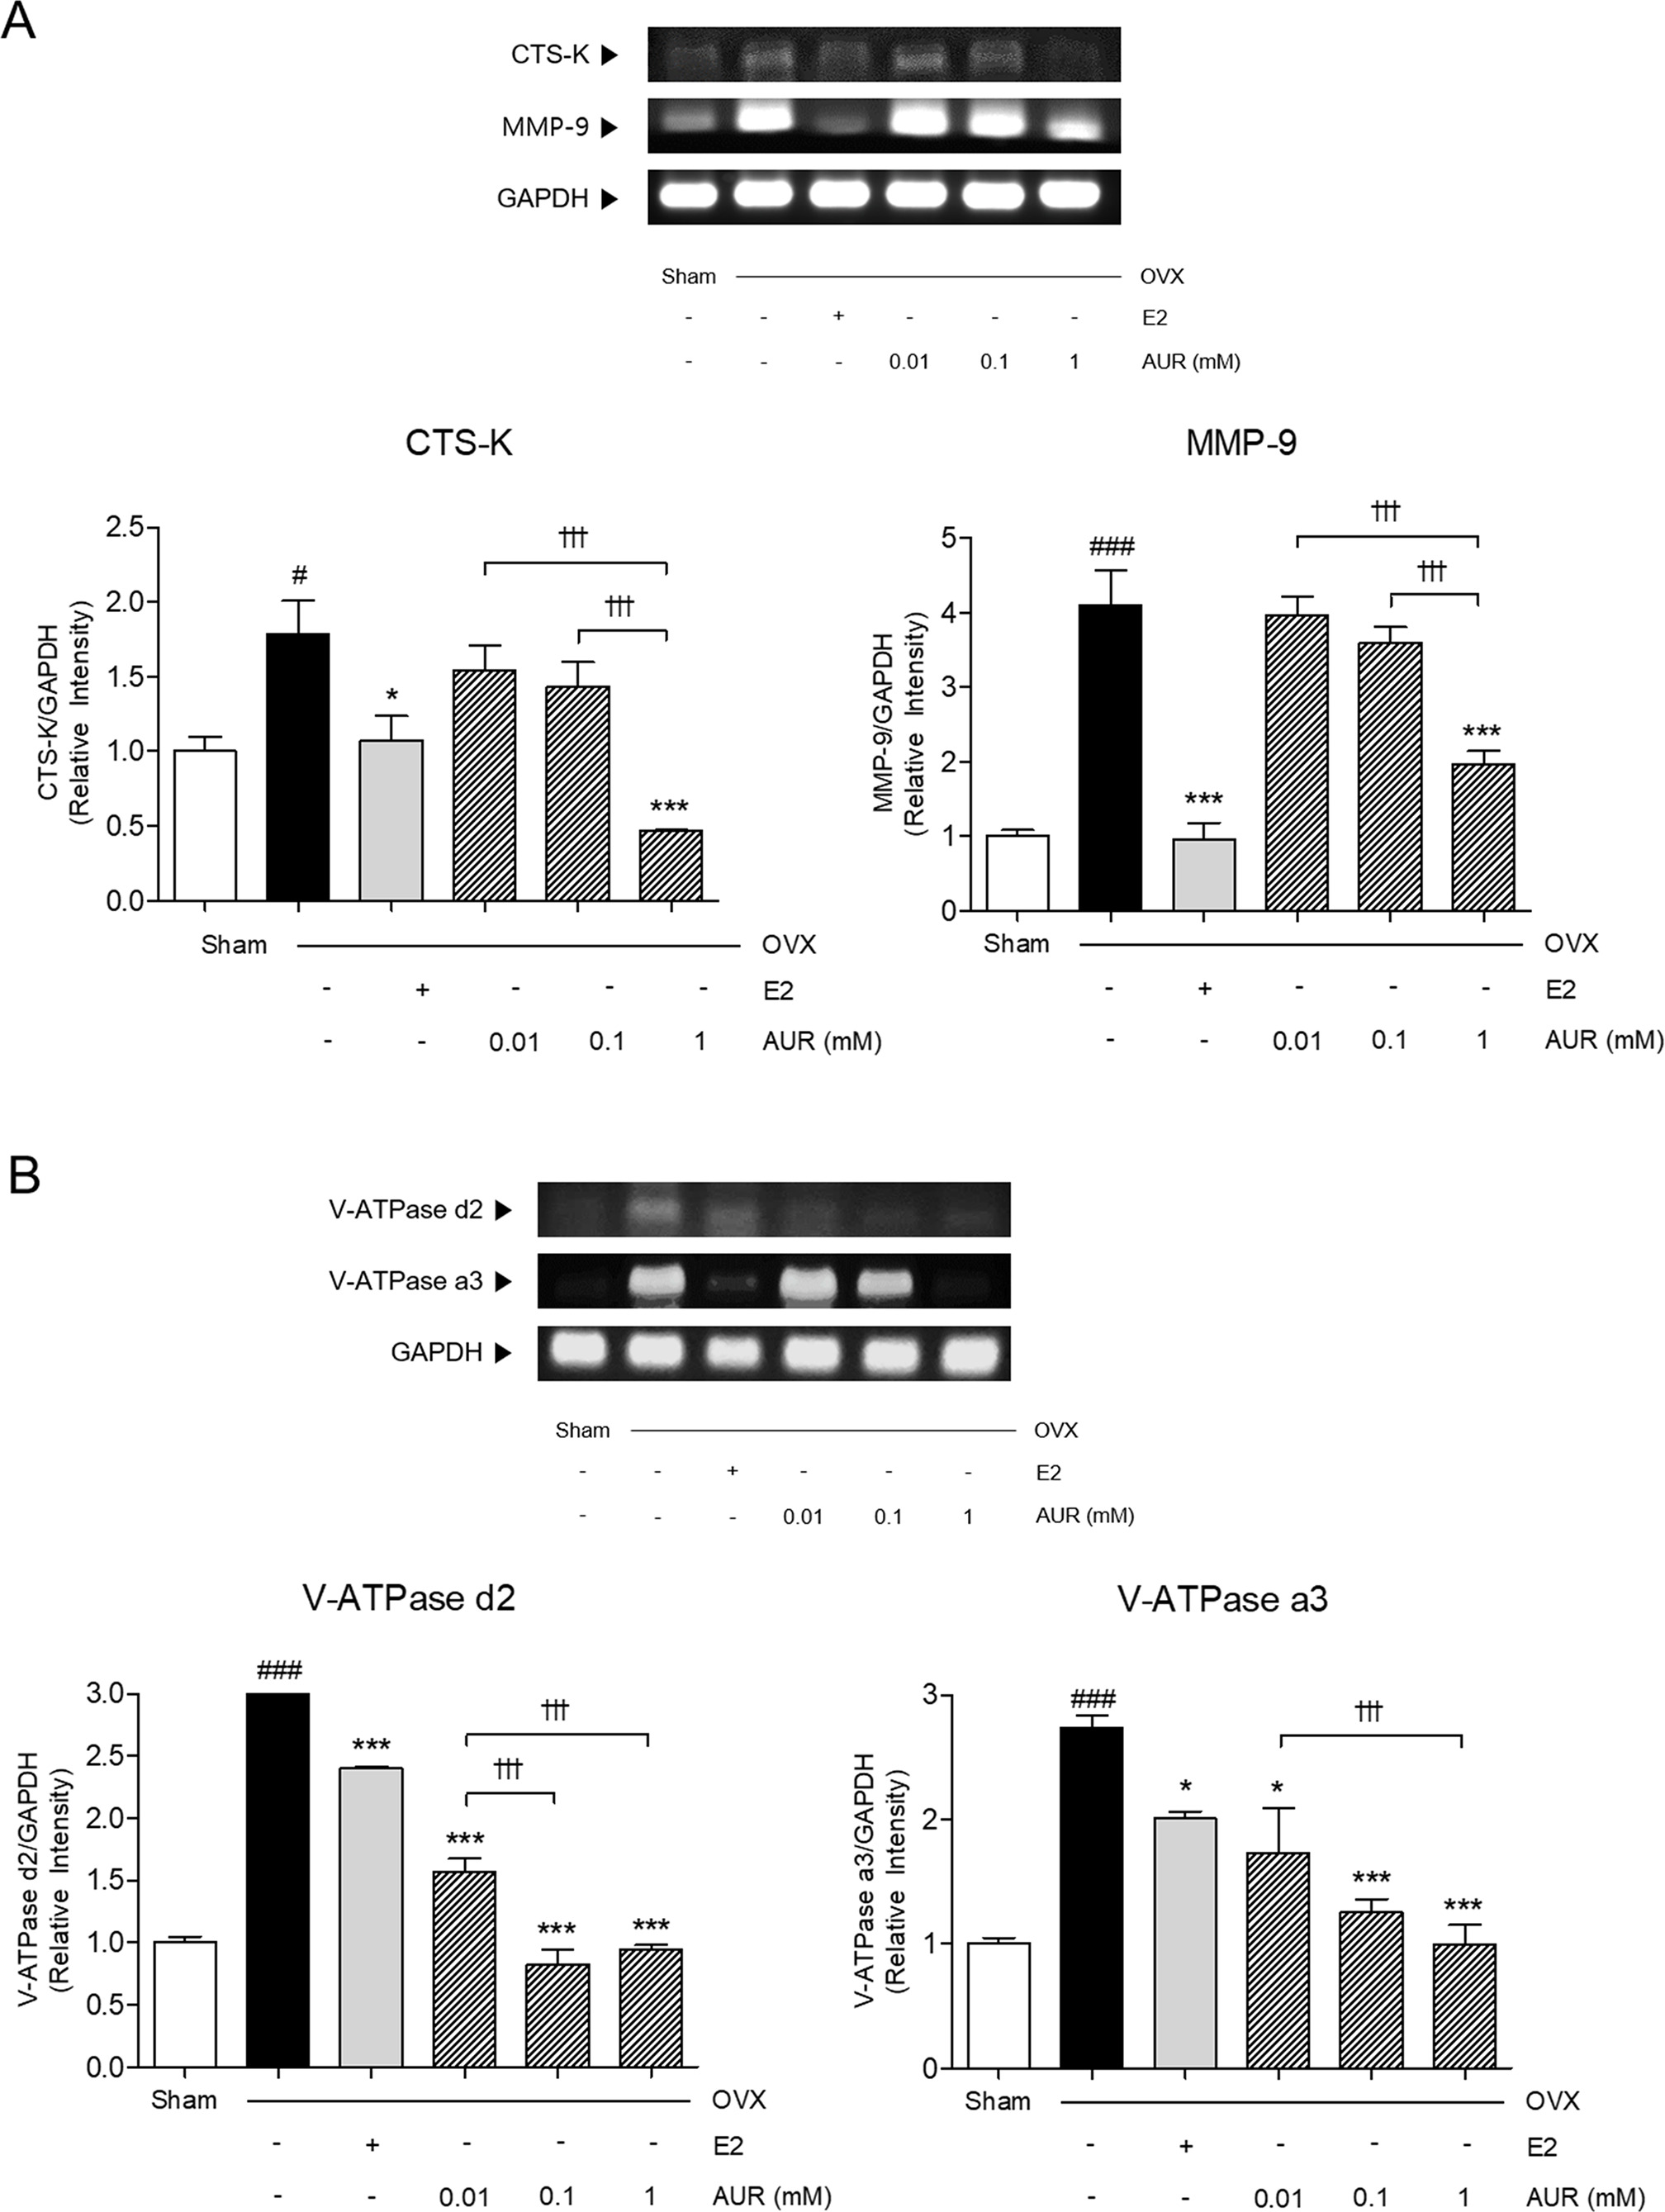 Fig. 7 
            Effects of auraptene (AUR) on the messenger RNA (mRNA) expression levels of osteoclastic markers including: a) cathepsin K (CTS-K) and matrix metalloproteinase (MMP)-9; and b) vacuolar ATPase (V-ATPase) d2 and V-ATPase a3 in femur (n = 7). Results are presented as mean (standard error of the mean). ##p < 0.01 and ###p < 0.001 versus Sham group; *p < 0.05, **p < 0.01, and ***p < 0.001 versus ovariectomized (OVX) group; †††p < 0.001 versus experimental groups (E2, AUR 0.01, AUR 0.1, and AUR 1). E2, 17β-estradiol group; GAPDH, glyceraldehyde 3-phosphate dehydrogenase.
          